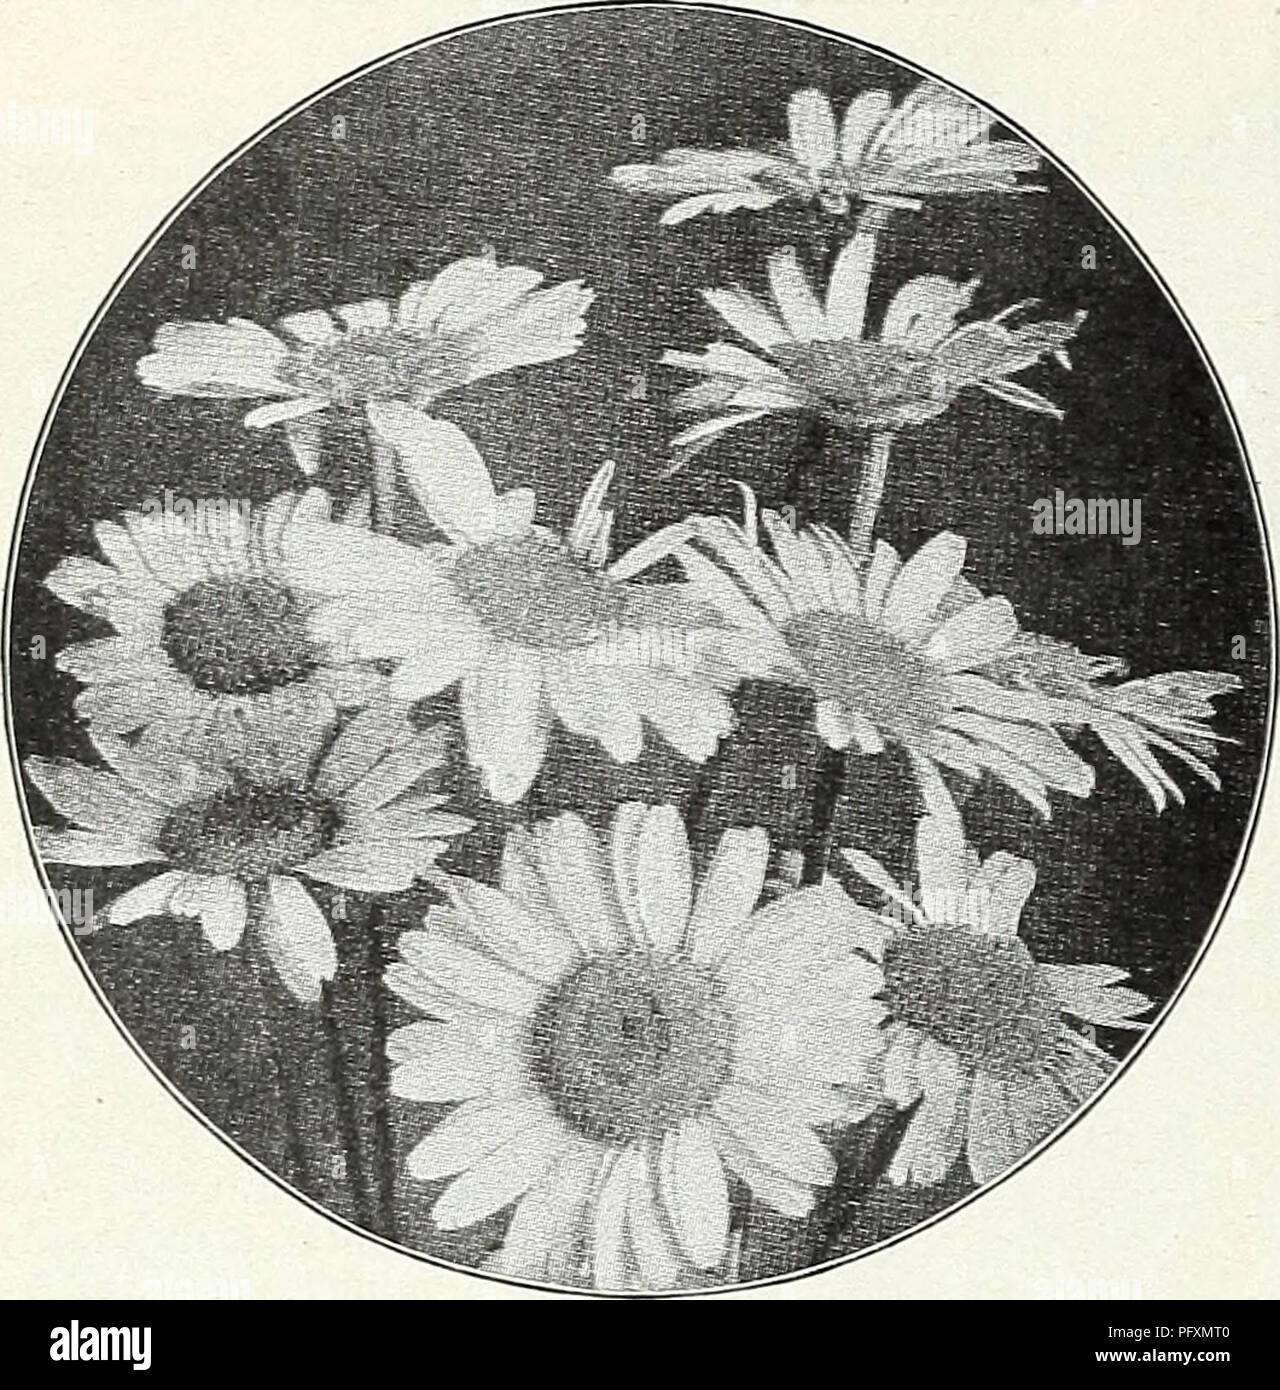 . Currie's garden annual : spring 1931 56th year. Flowers Seeds Catalogs; Bulbs (Plants) Seeds Catalogs; Vegetables Seeds Catalogs; Nurseries (Horticulture) Catalogs; Plants, Ornamental Catalogs; Gardening Equipment and supplies Catalogs. CURRIE BROTHERS CO. MILWAUKEE, WISCONSIN. ANCHUSA ITALICA Dropmore Variety—An early and effective border plant, bearing an abundance of rich gentian blue flowers, 4 feet. Price, each, 2Sc; per doz., $2.50. ANEMONE JAPONICA (Japanese Windflower) Valuable for cut flowers, blooming in fall. Alice—Large rosy-pink, lavender center. Queen Charlotte—Semi-double pink Stock Photo